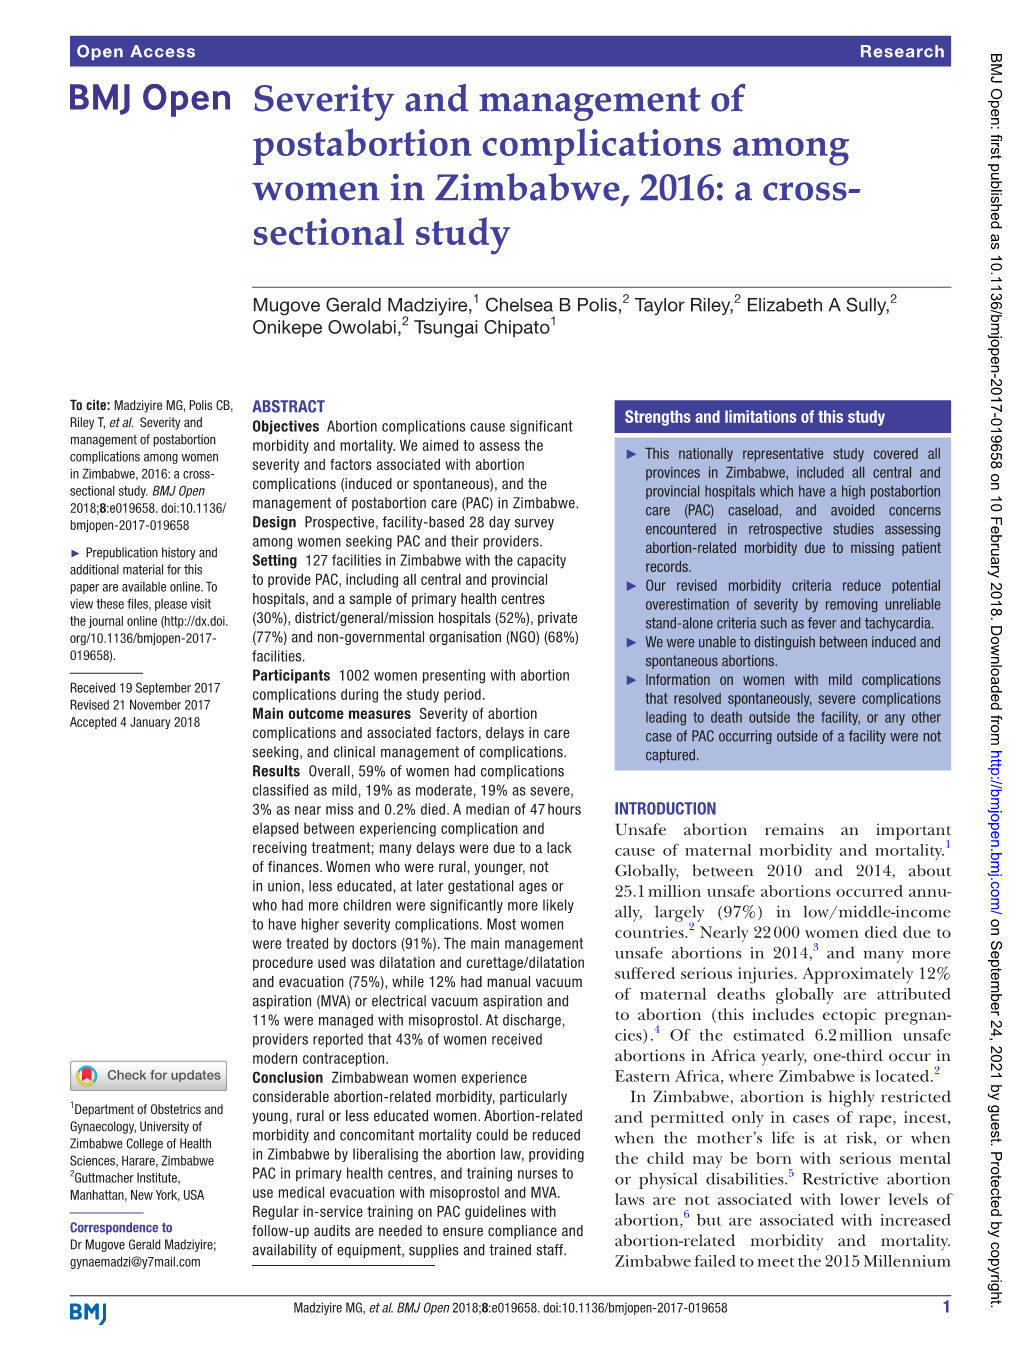 Severity and Management of Postabortion Complications Among Women in Zimbabwe, 2016: a Cross- Sectional Study